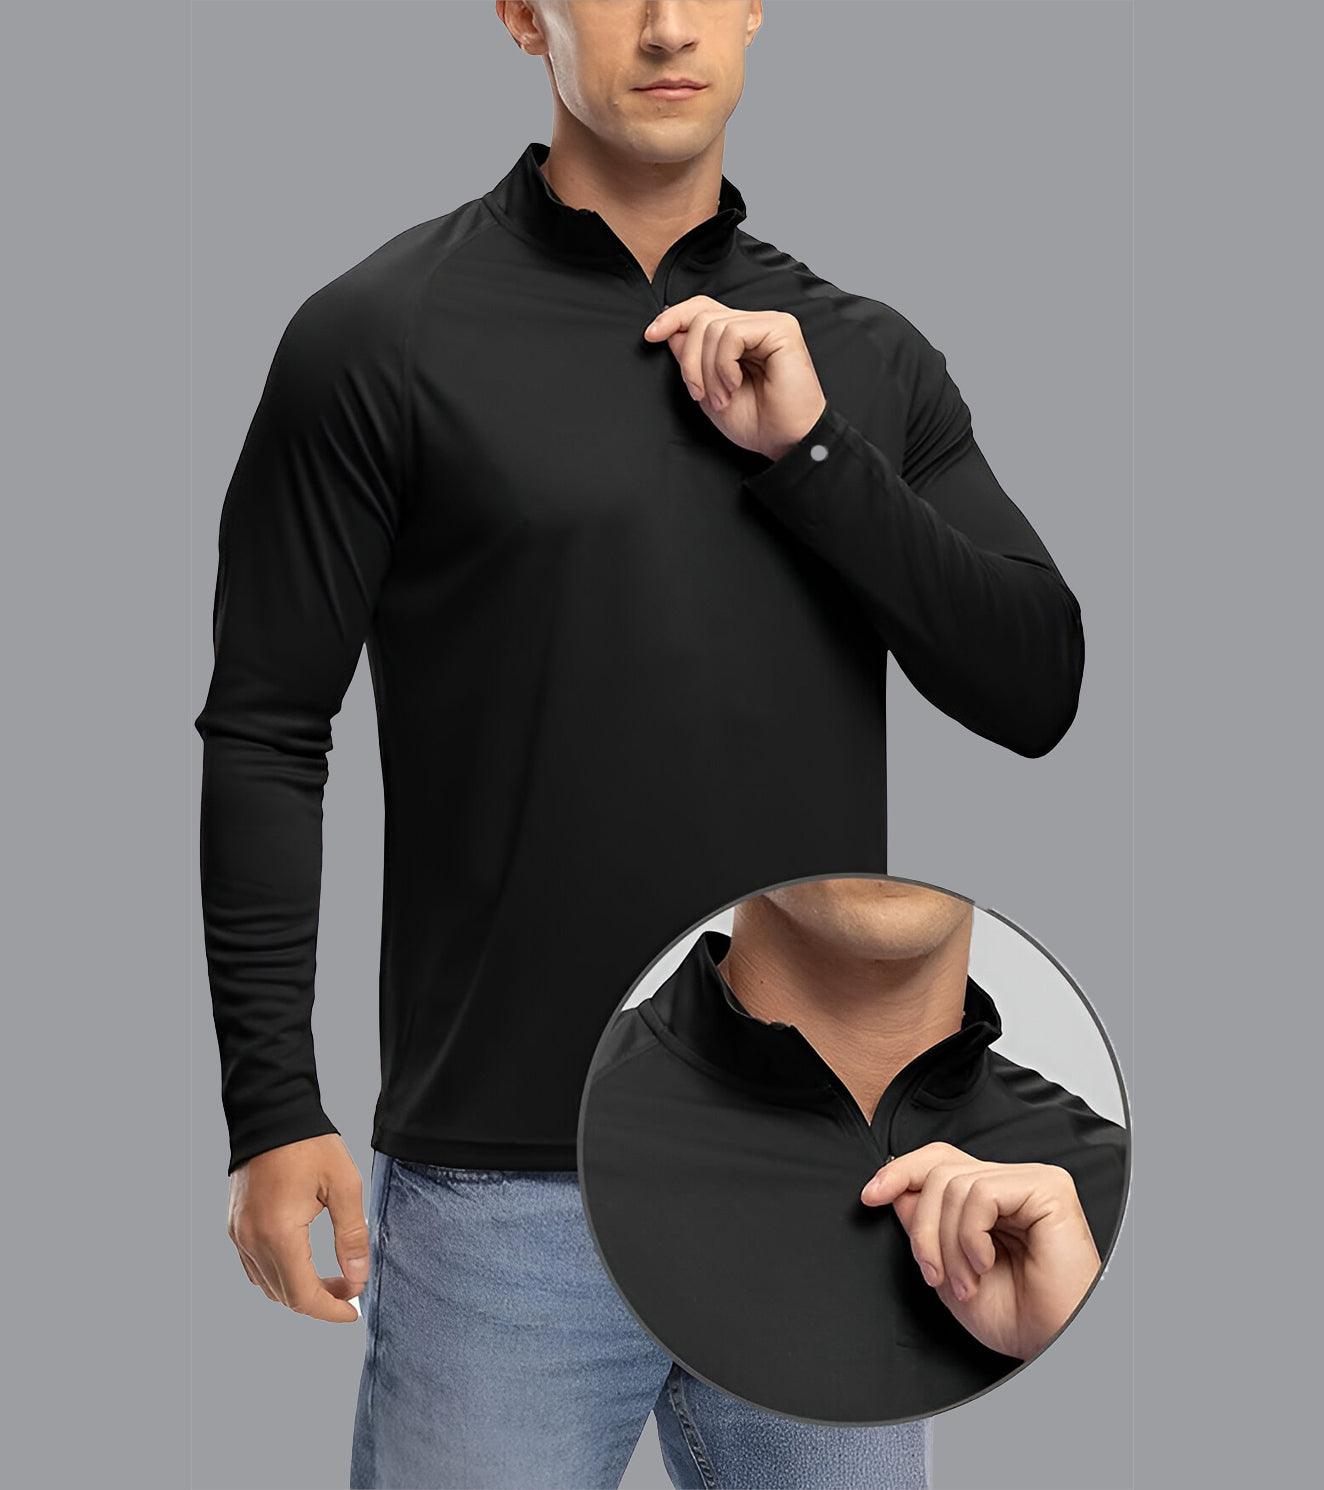 Load image into Gallery viewer, Men&amp;#39;s Black Dry Fit Half Zip Long Sleeve Running T-Shirt - wodarmour
